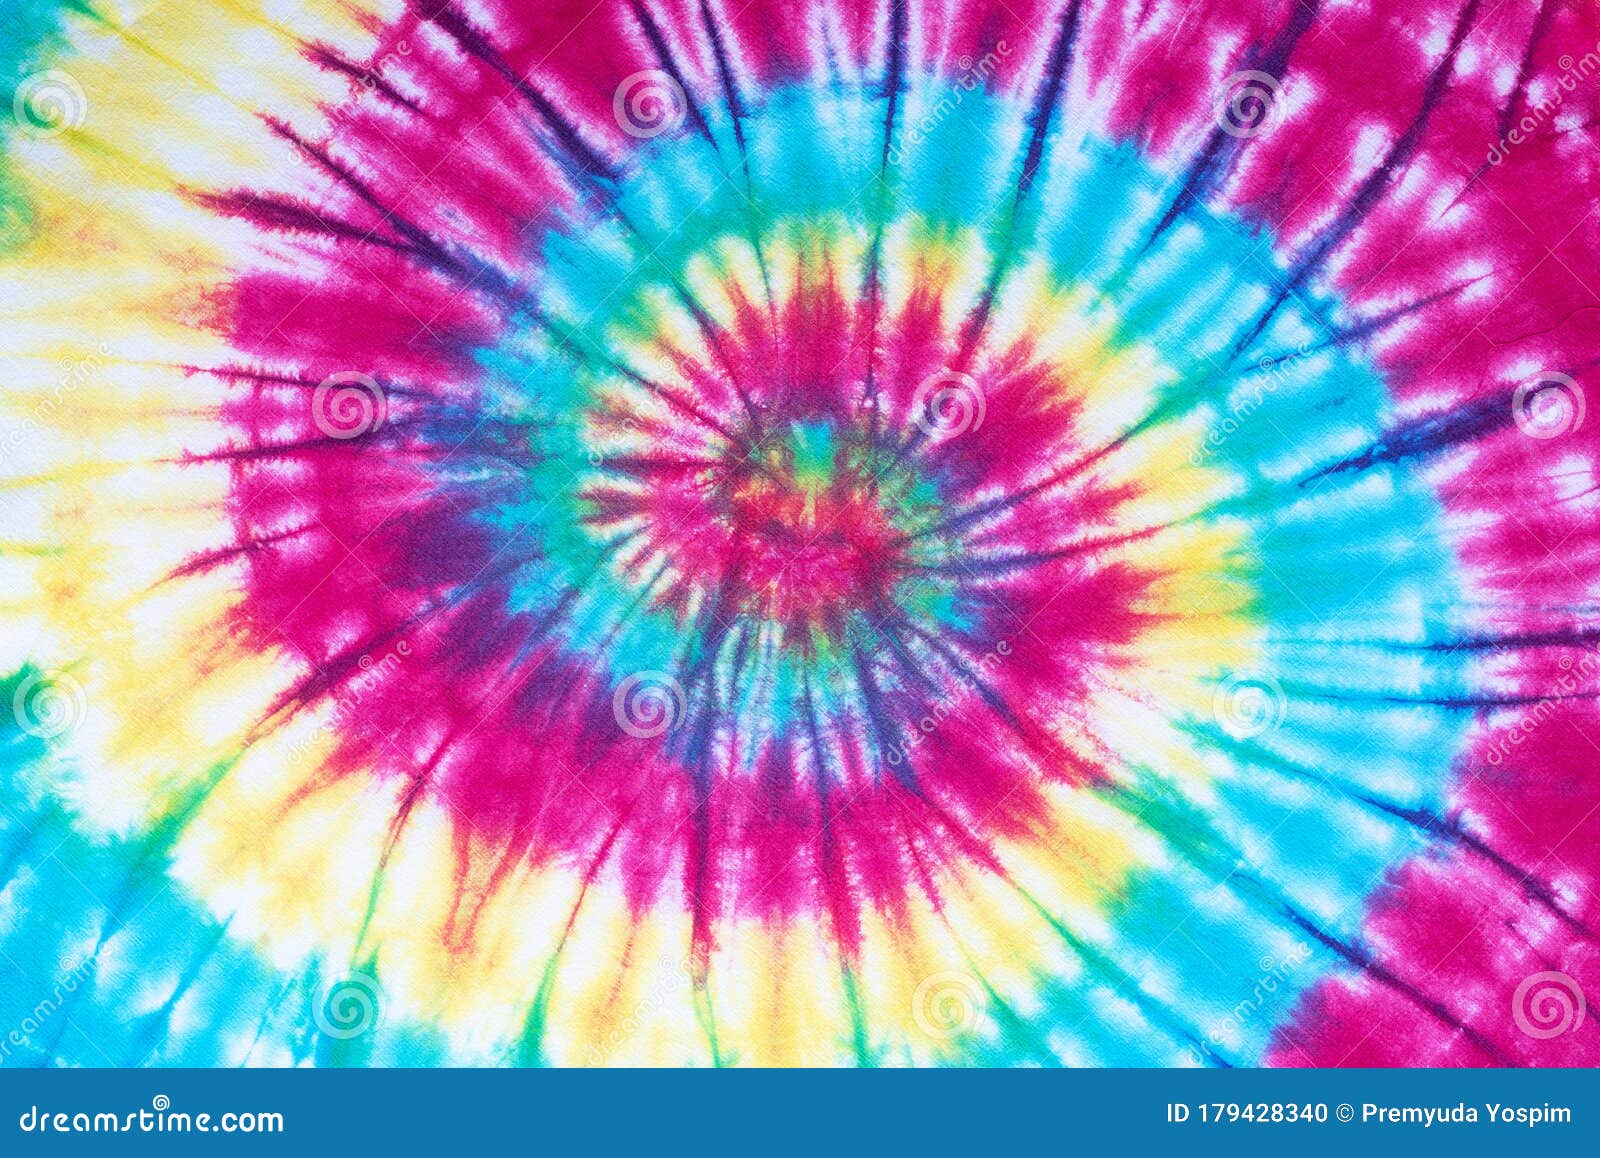 Tie Dye Pattern Abstract Texture Background Stock Photo - Image of blue,  psychedelic: 179428340